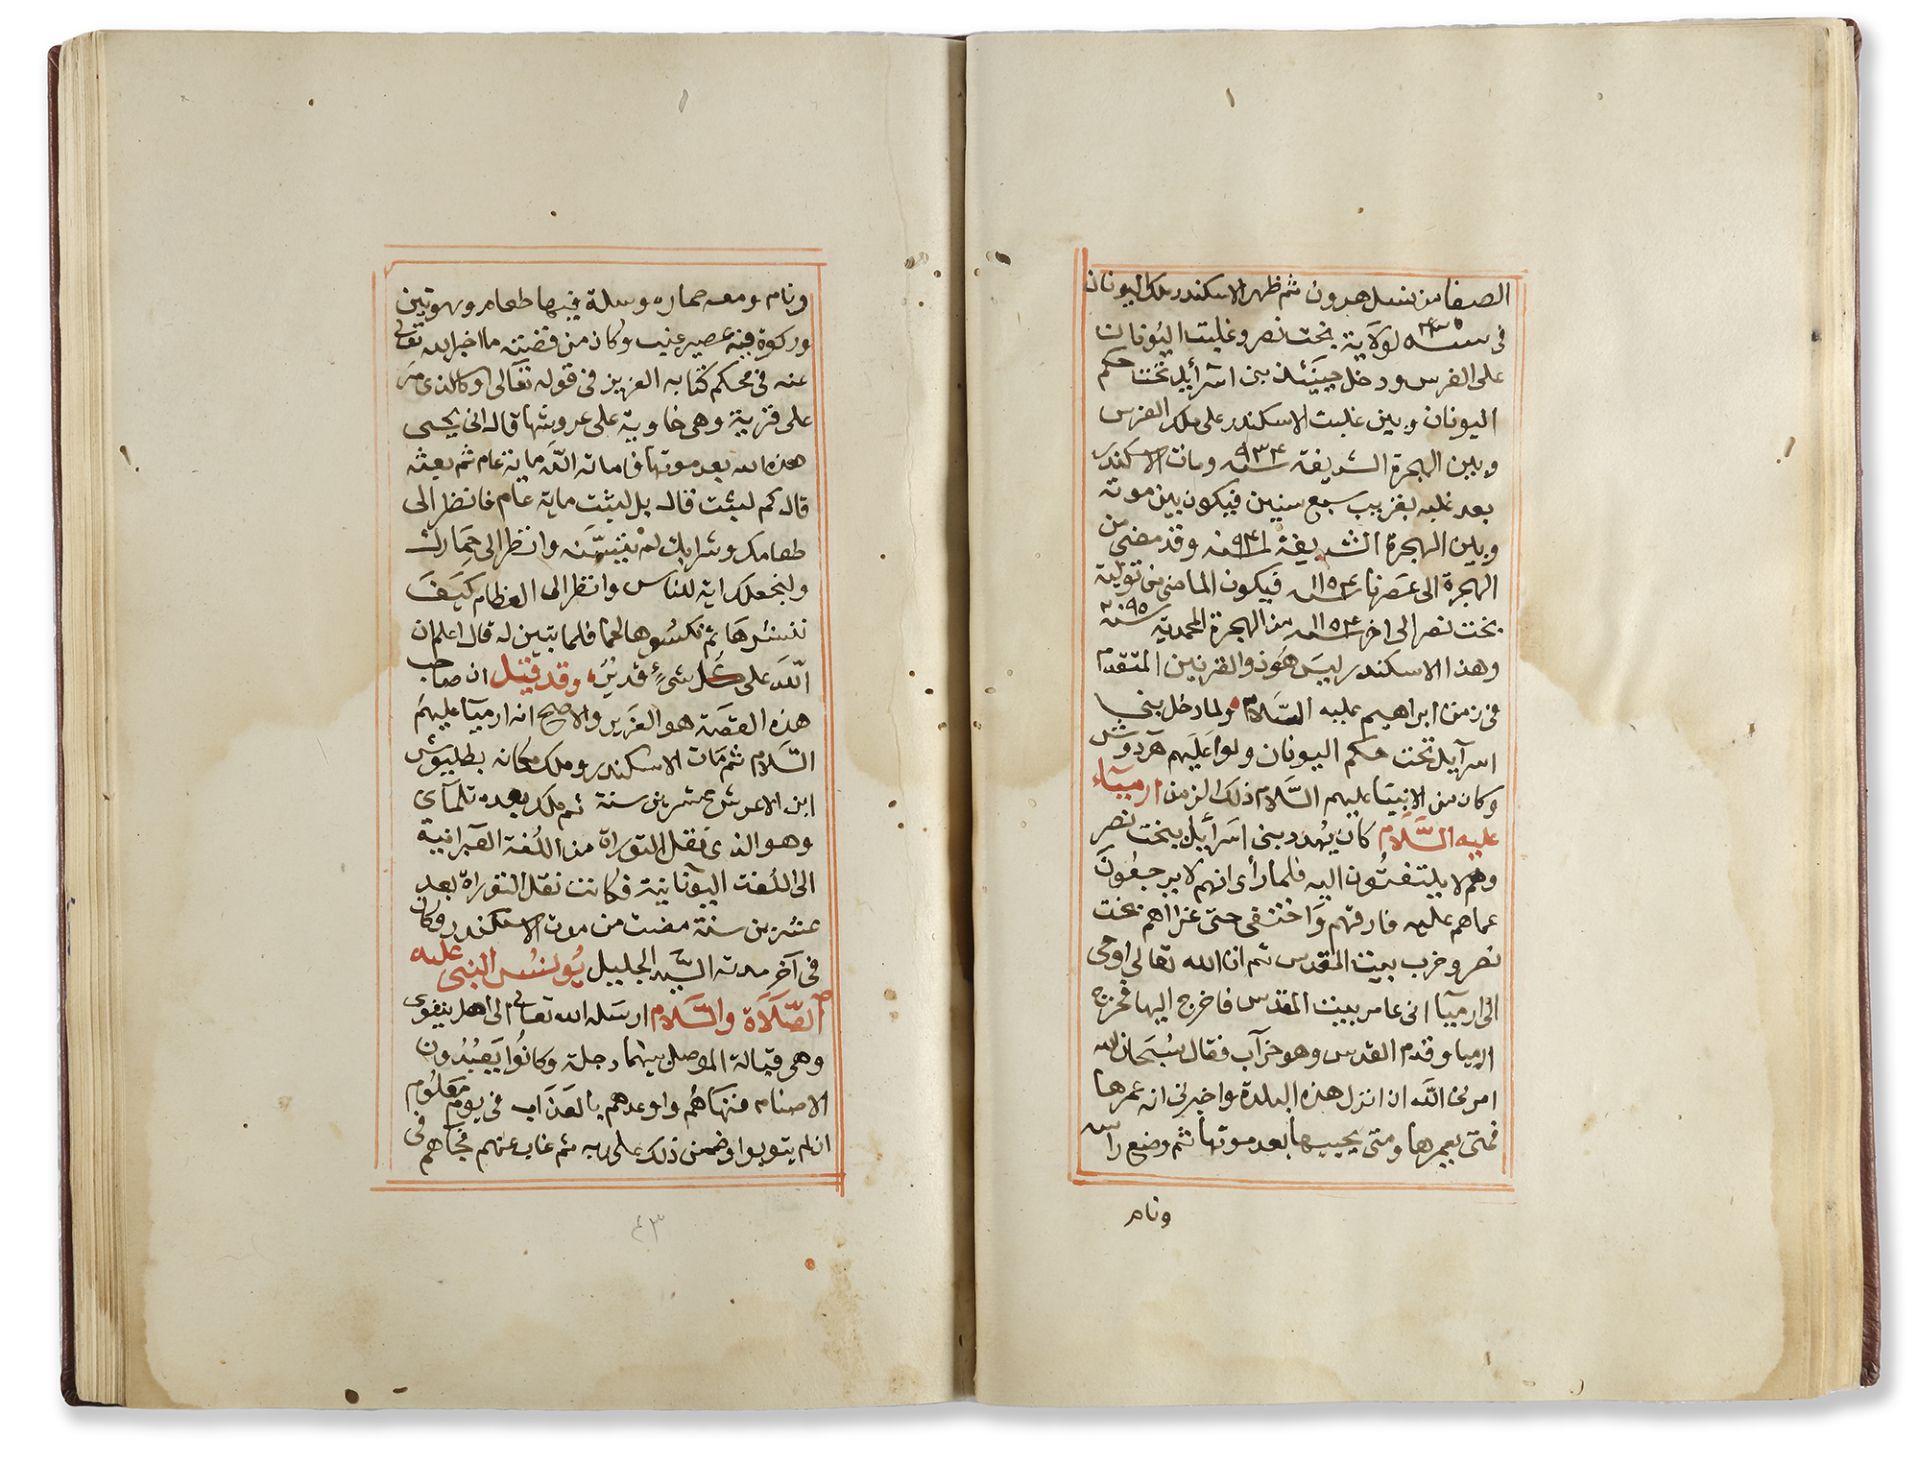 MABAETH AL-IRTIHAL FI SHAD AL-RIHAL, THE MOTIVATION OF MIGRATION TO THE THREE MOSQUES, OTTOMAN TURKE - Image 4 of 5